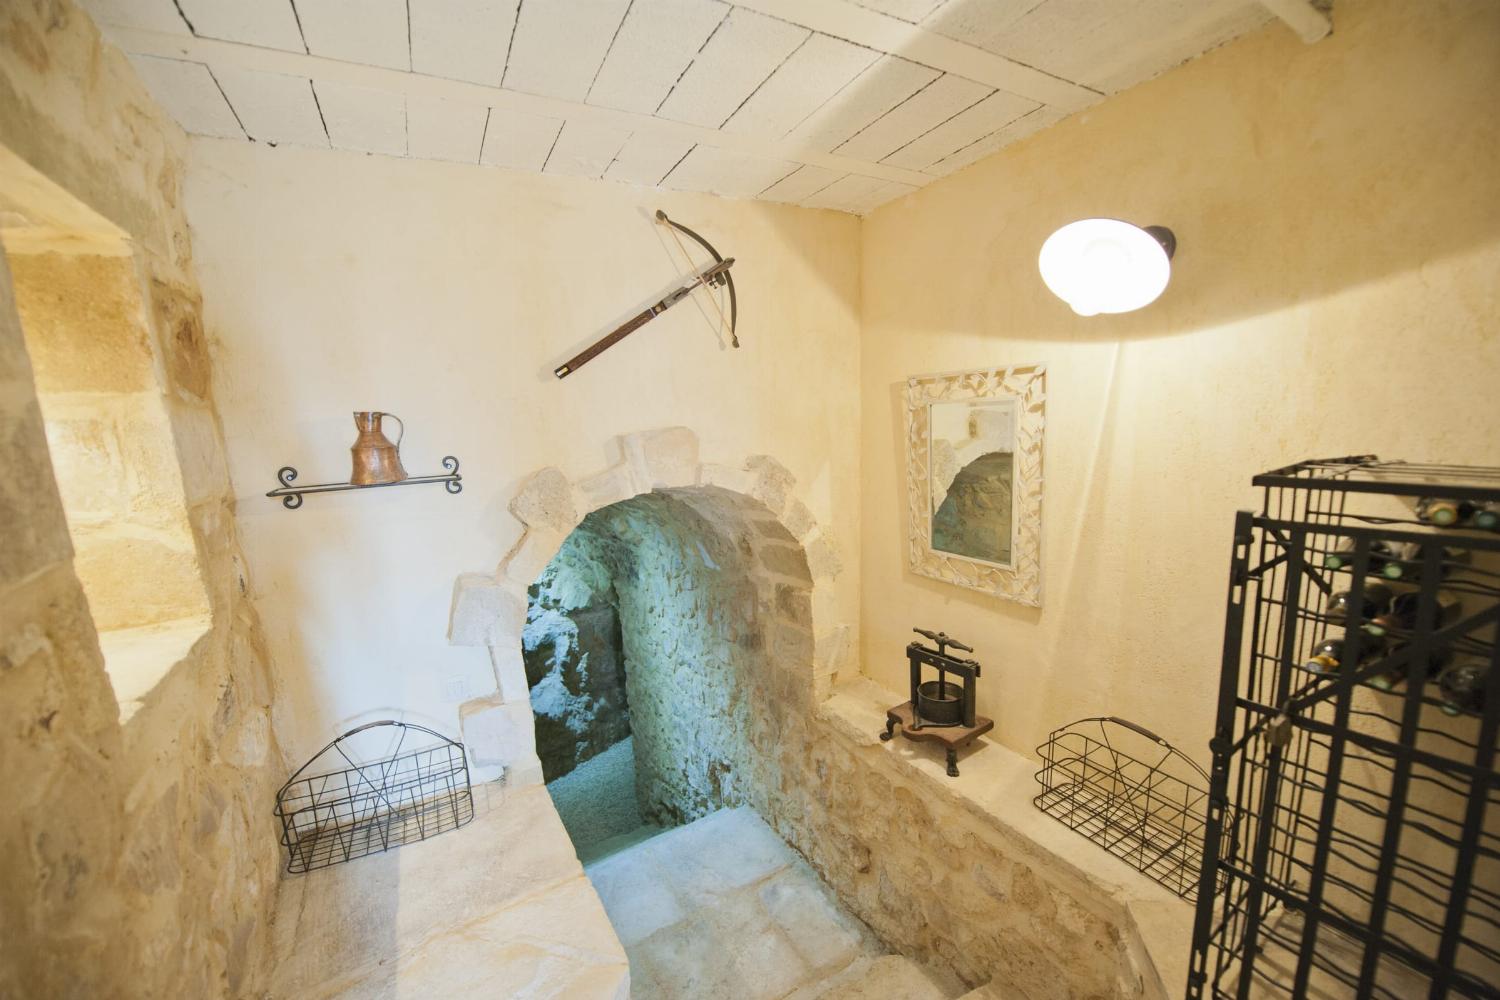 Staircase | Rental accommodation in Provence